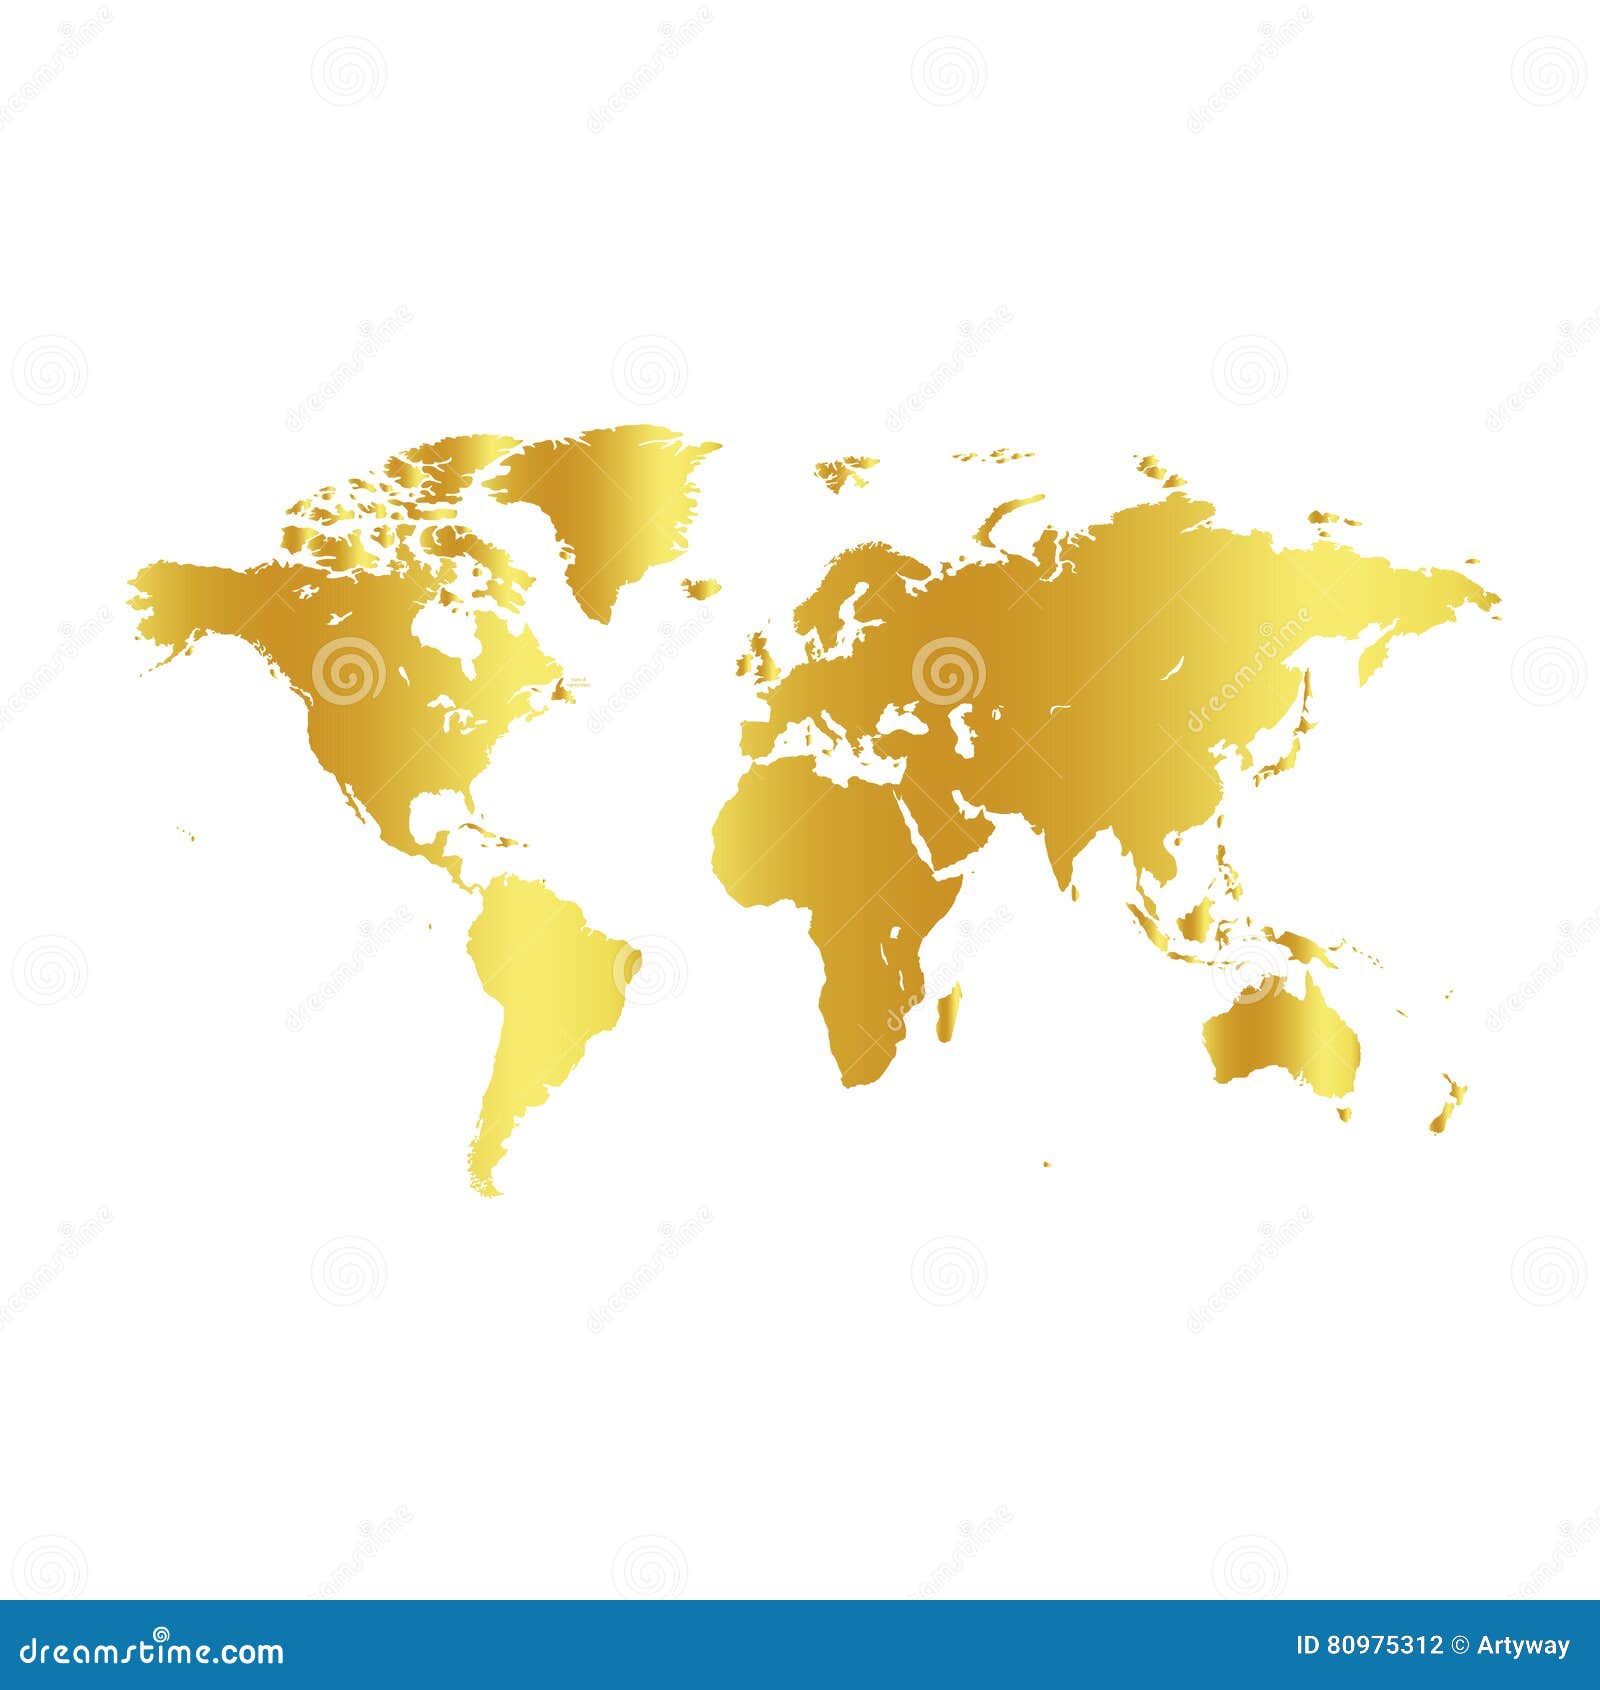 golden color world map on white background. globe  backdrop. cartography  wallpaper. geographic locations